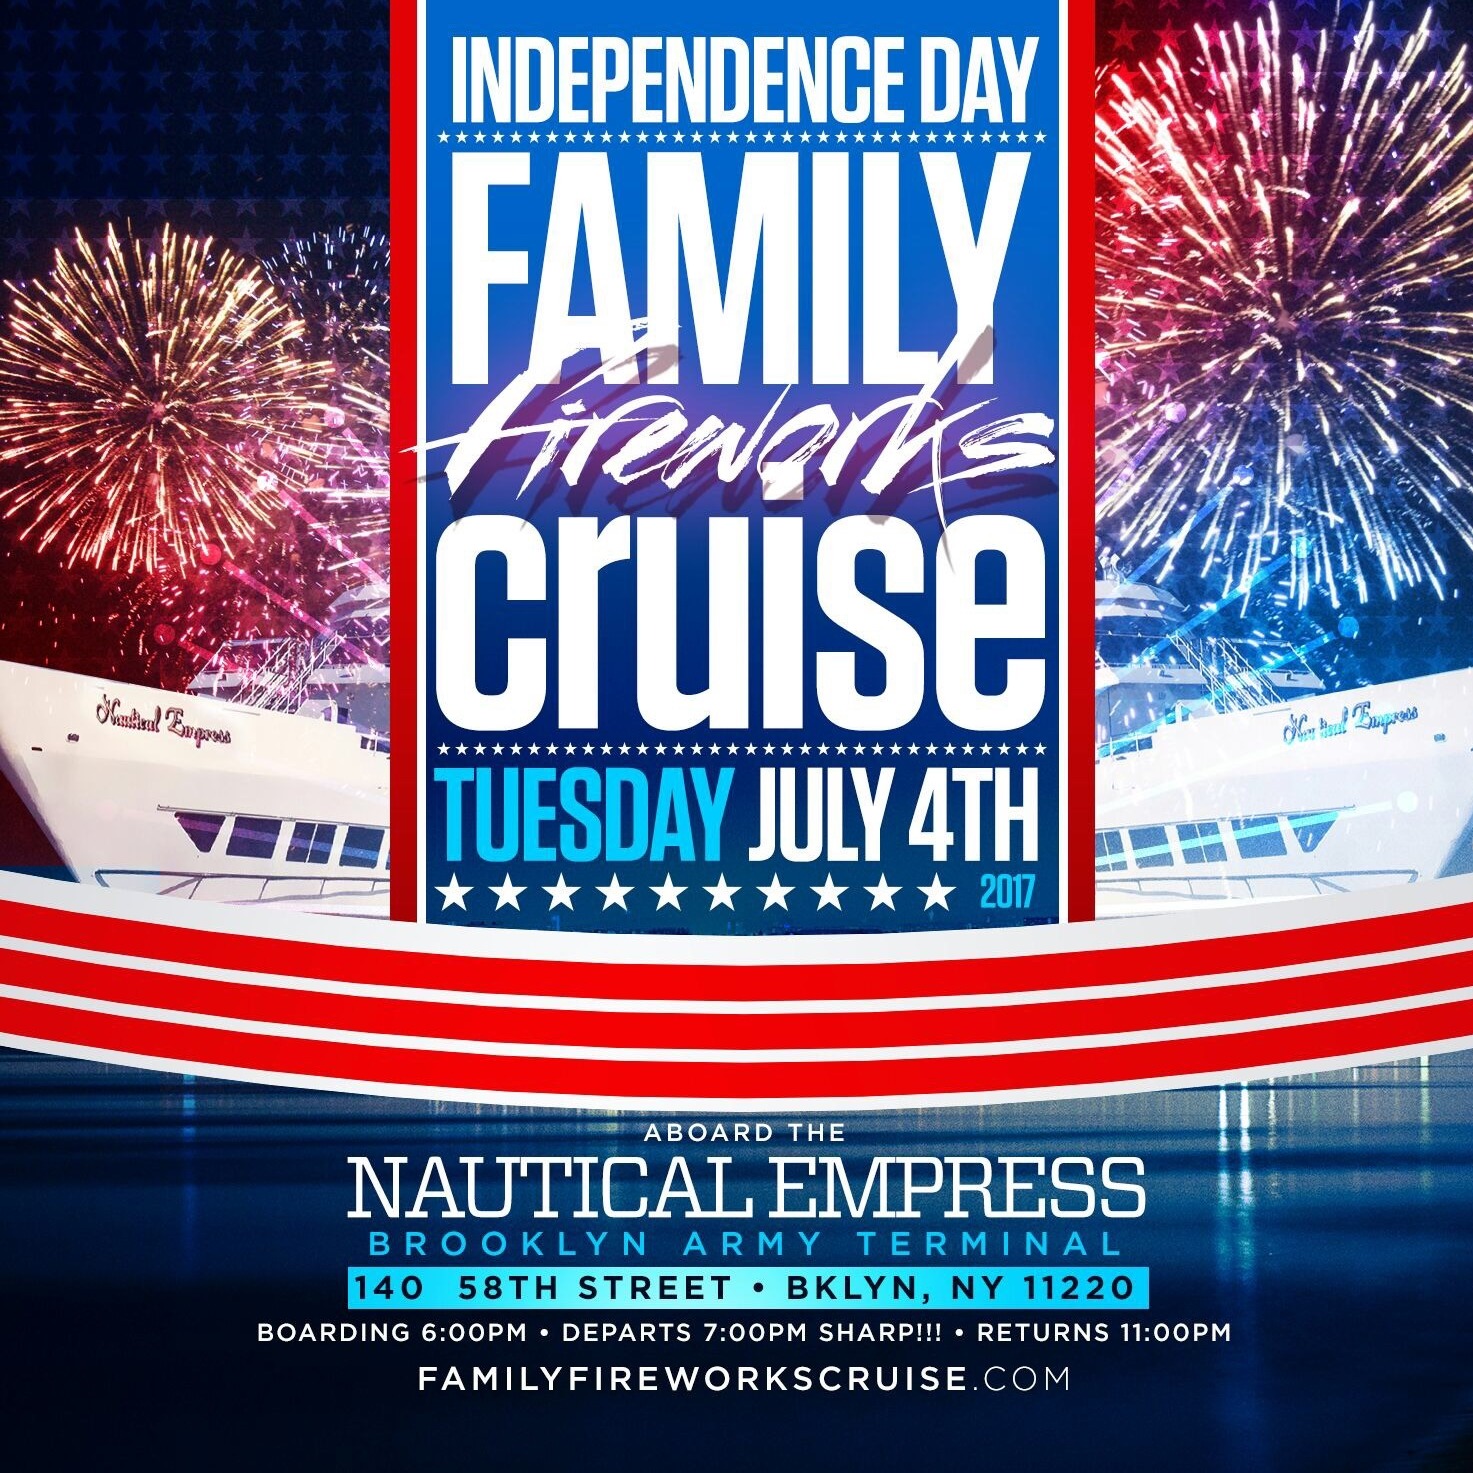 4th of JULY INDEPENDENCE DAY 2017 FAMILY FIREWORKS CRUISE BROOKLYN